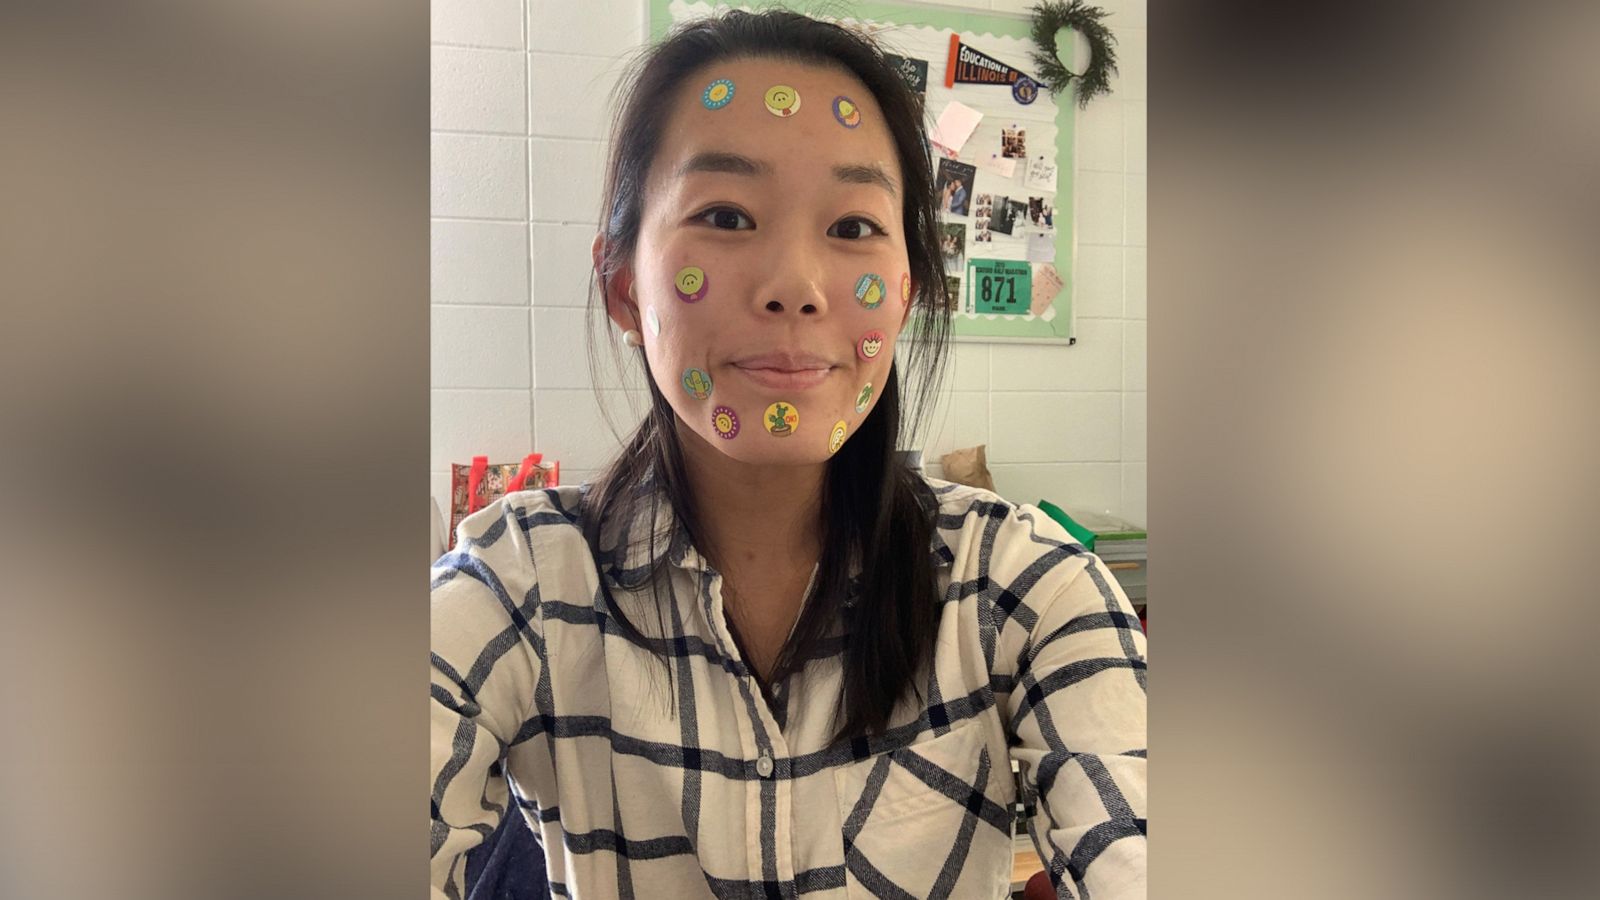 PHOTO: Diane Moon, 27, a middle school math teacher in Illinois, uses stickers to engage her students during remote learning.